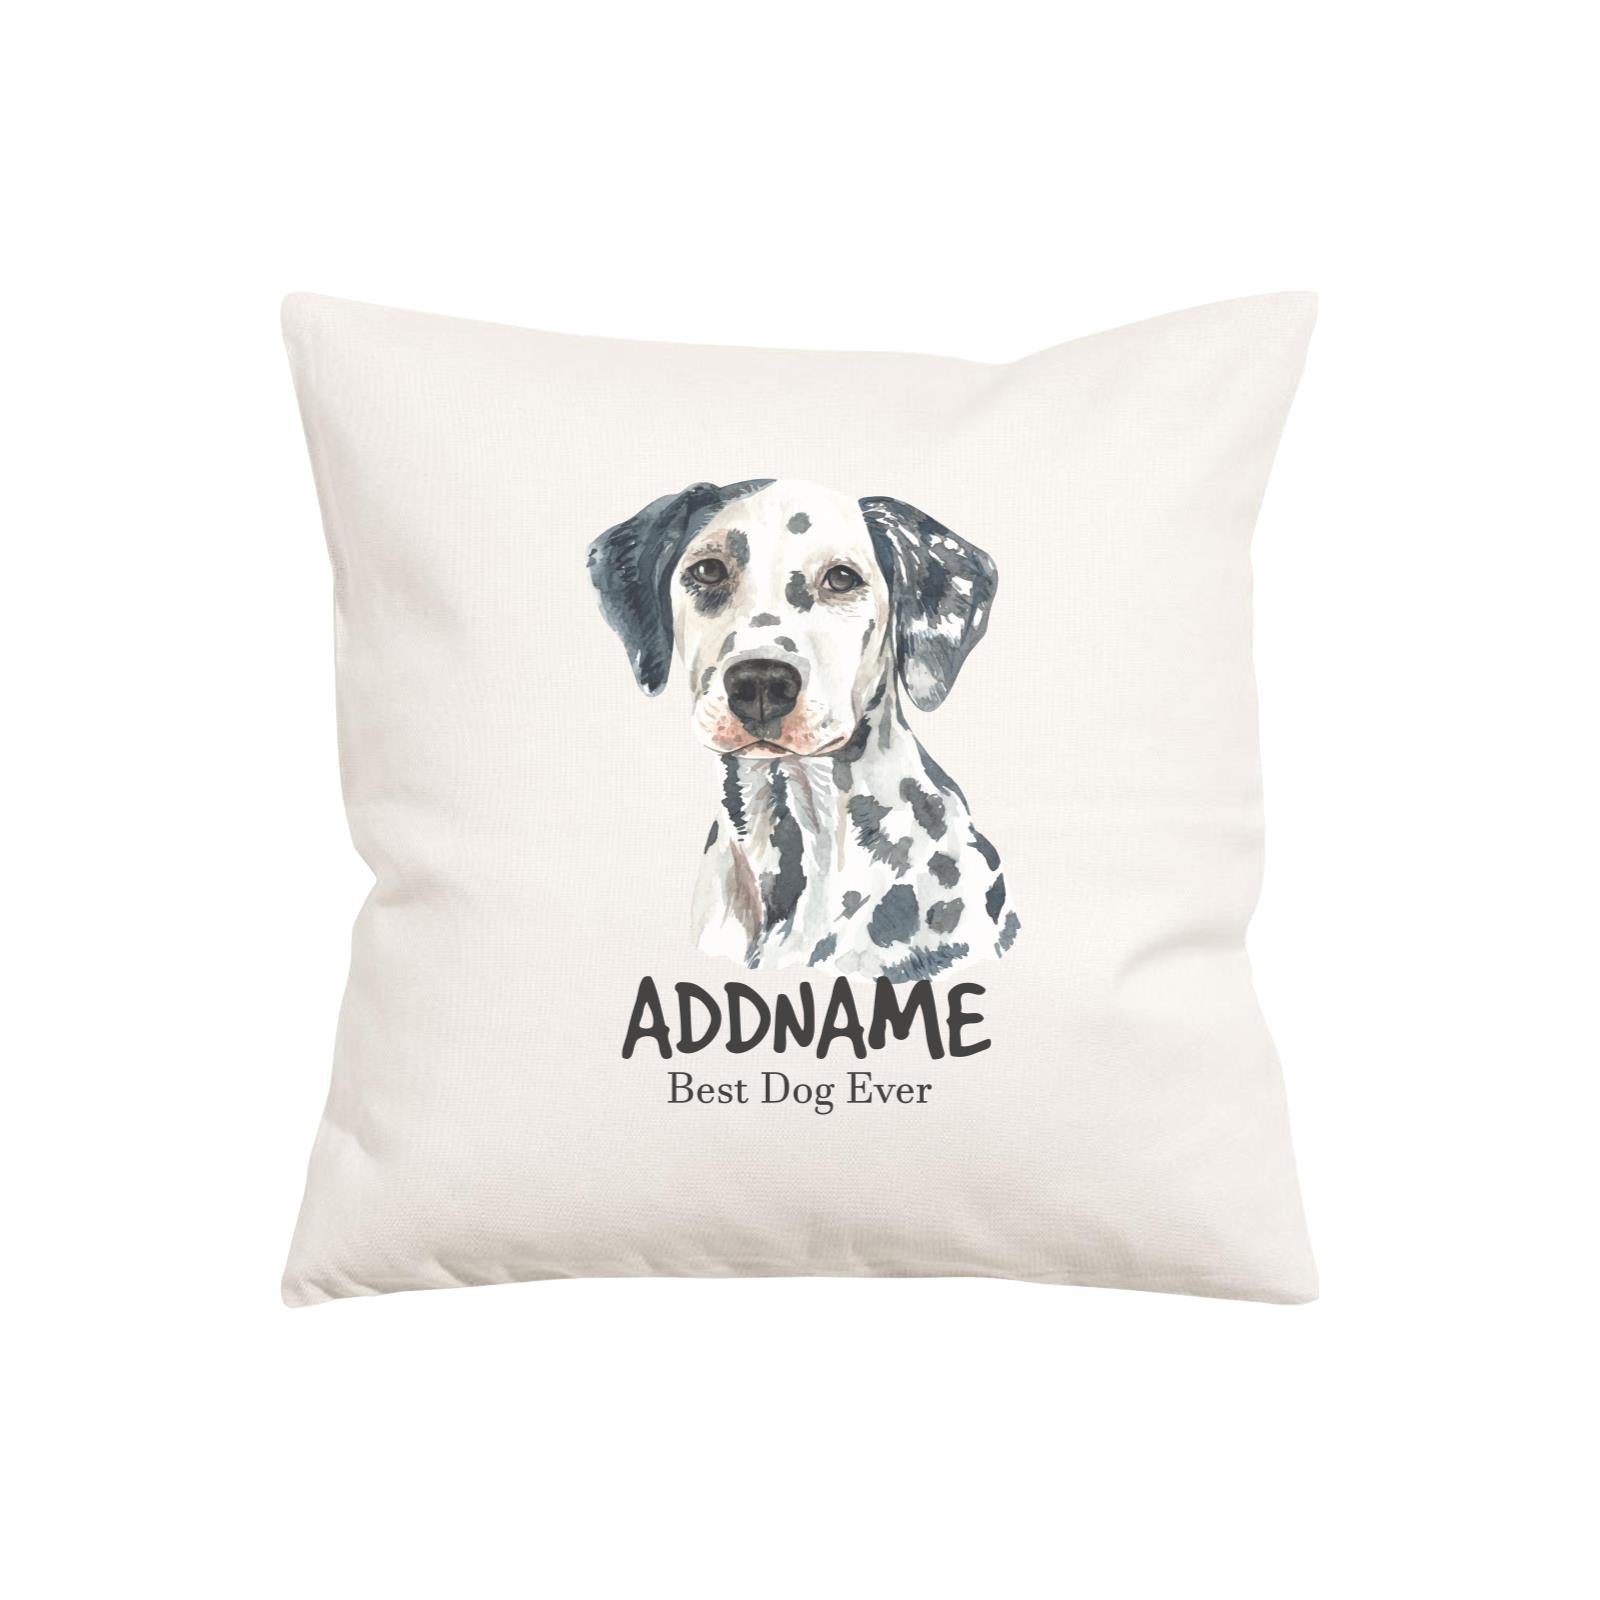 Watercolor Dog Series Dalmatian Front Best Dog Ever Addname Pillow Cushion